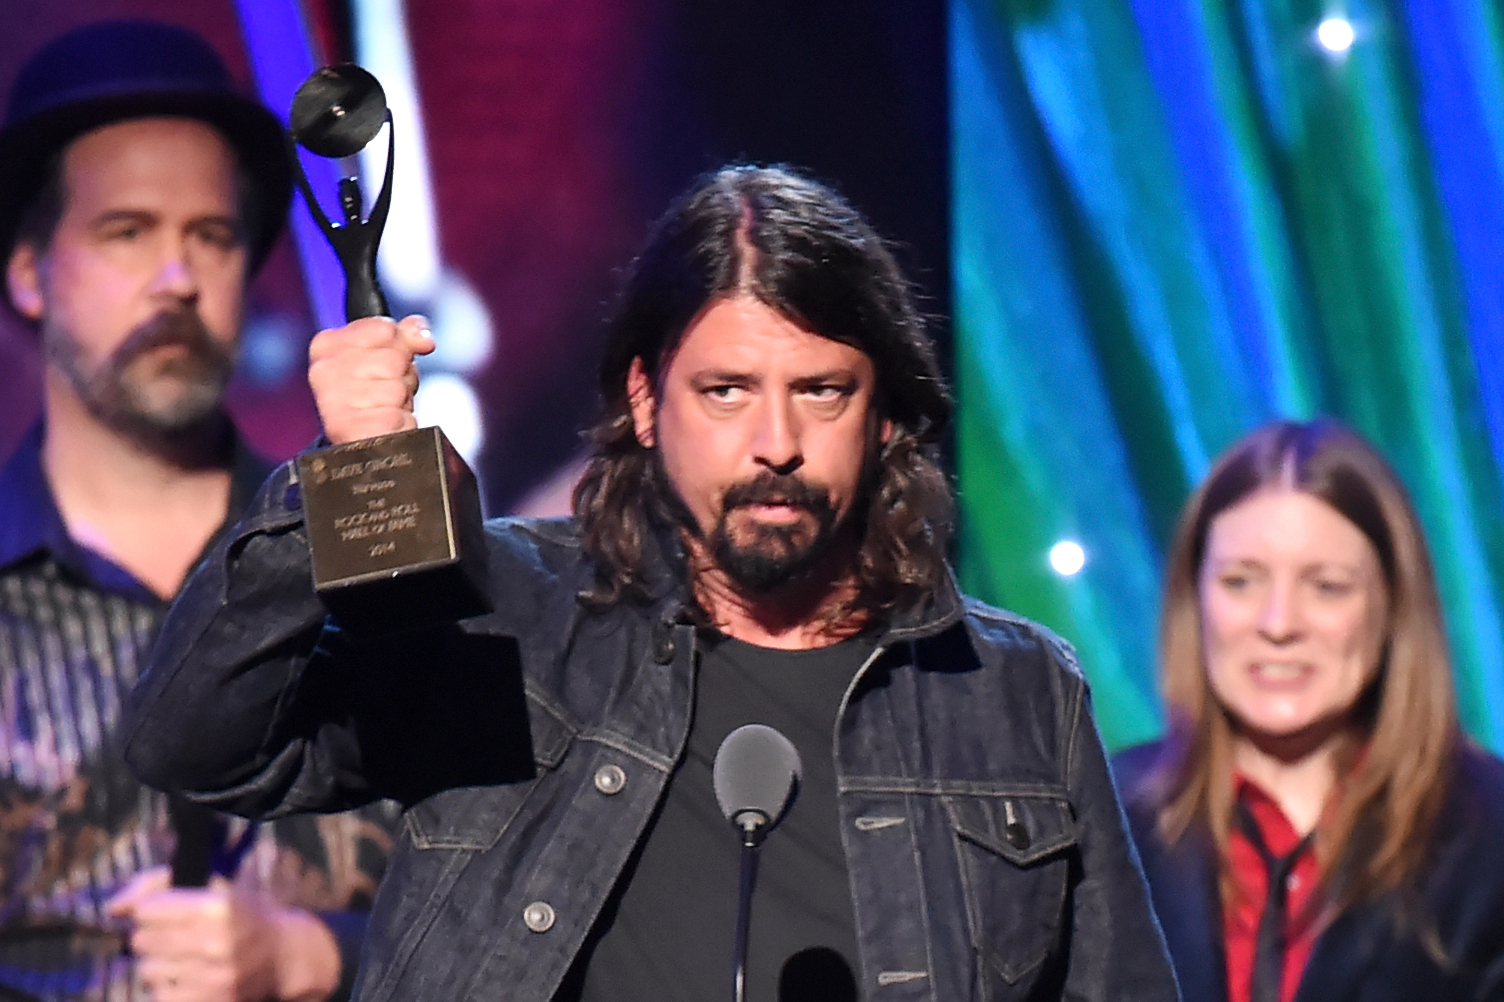 From left: Krist Novoselic, Dave Grohl and Kimberly Cobain at the 29th Annual Rock And Roll Hall Of Fame Induction Ceremony, on April 10, 2014 in Brooklyn, N.Y.